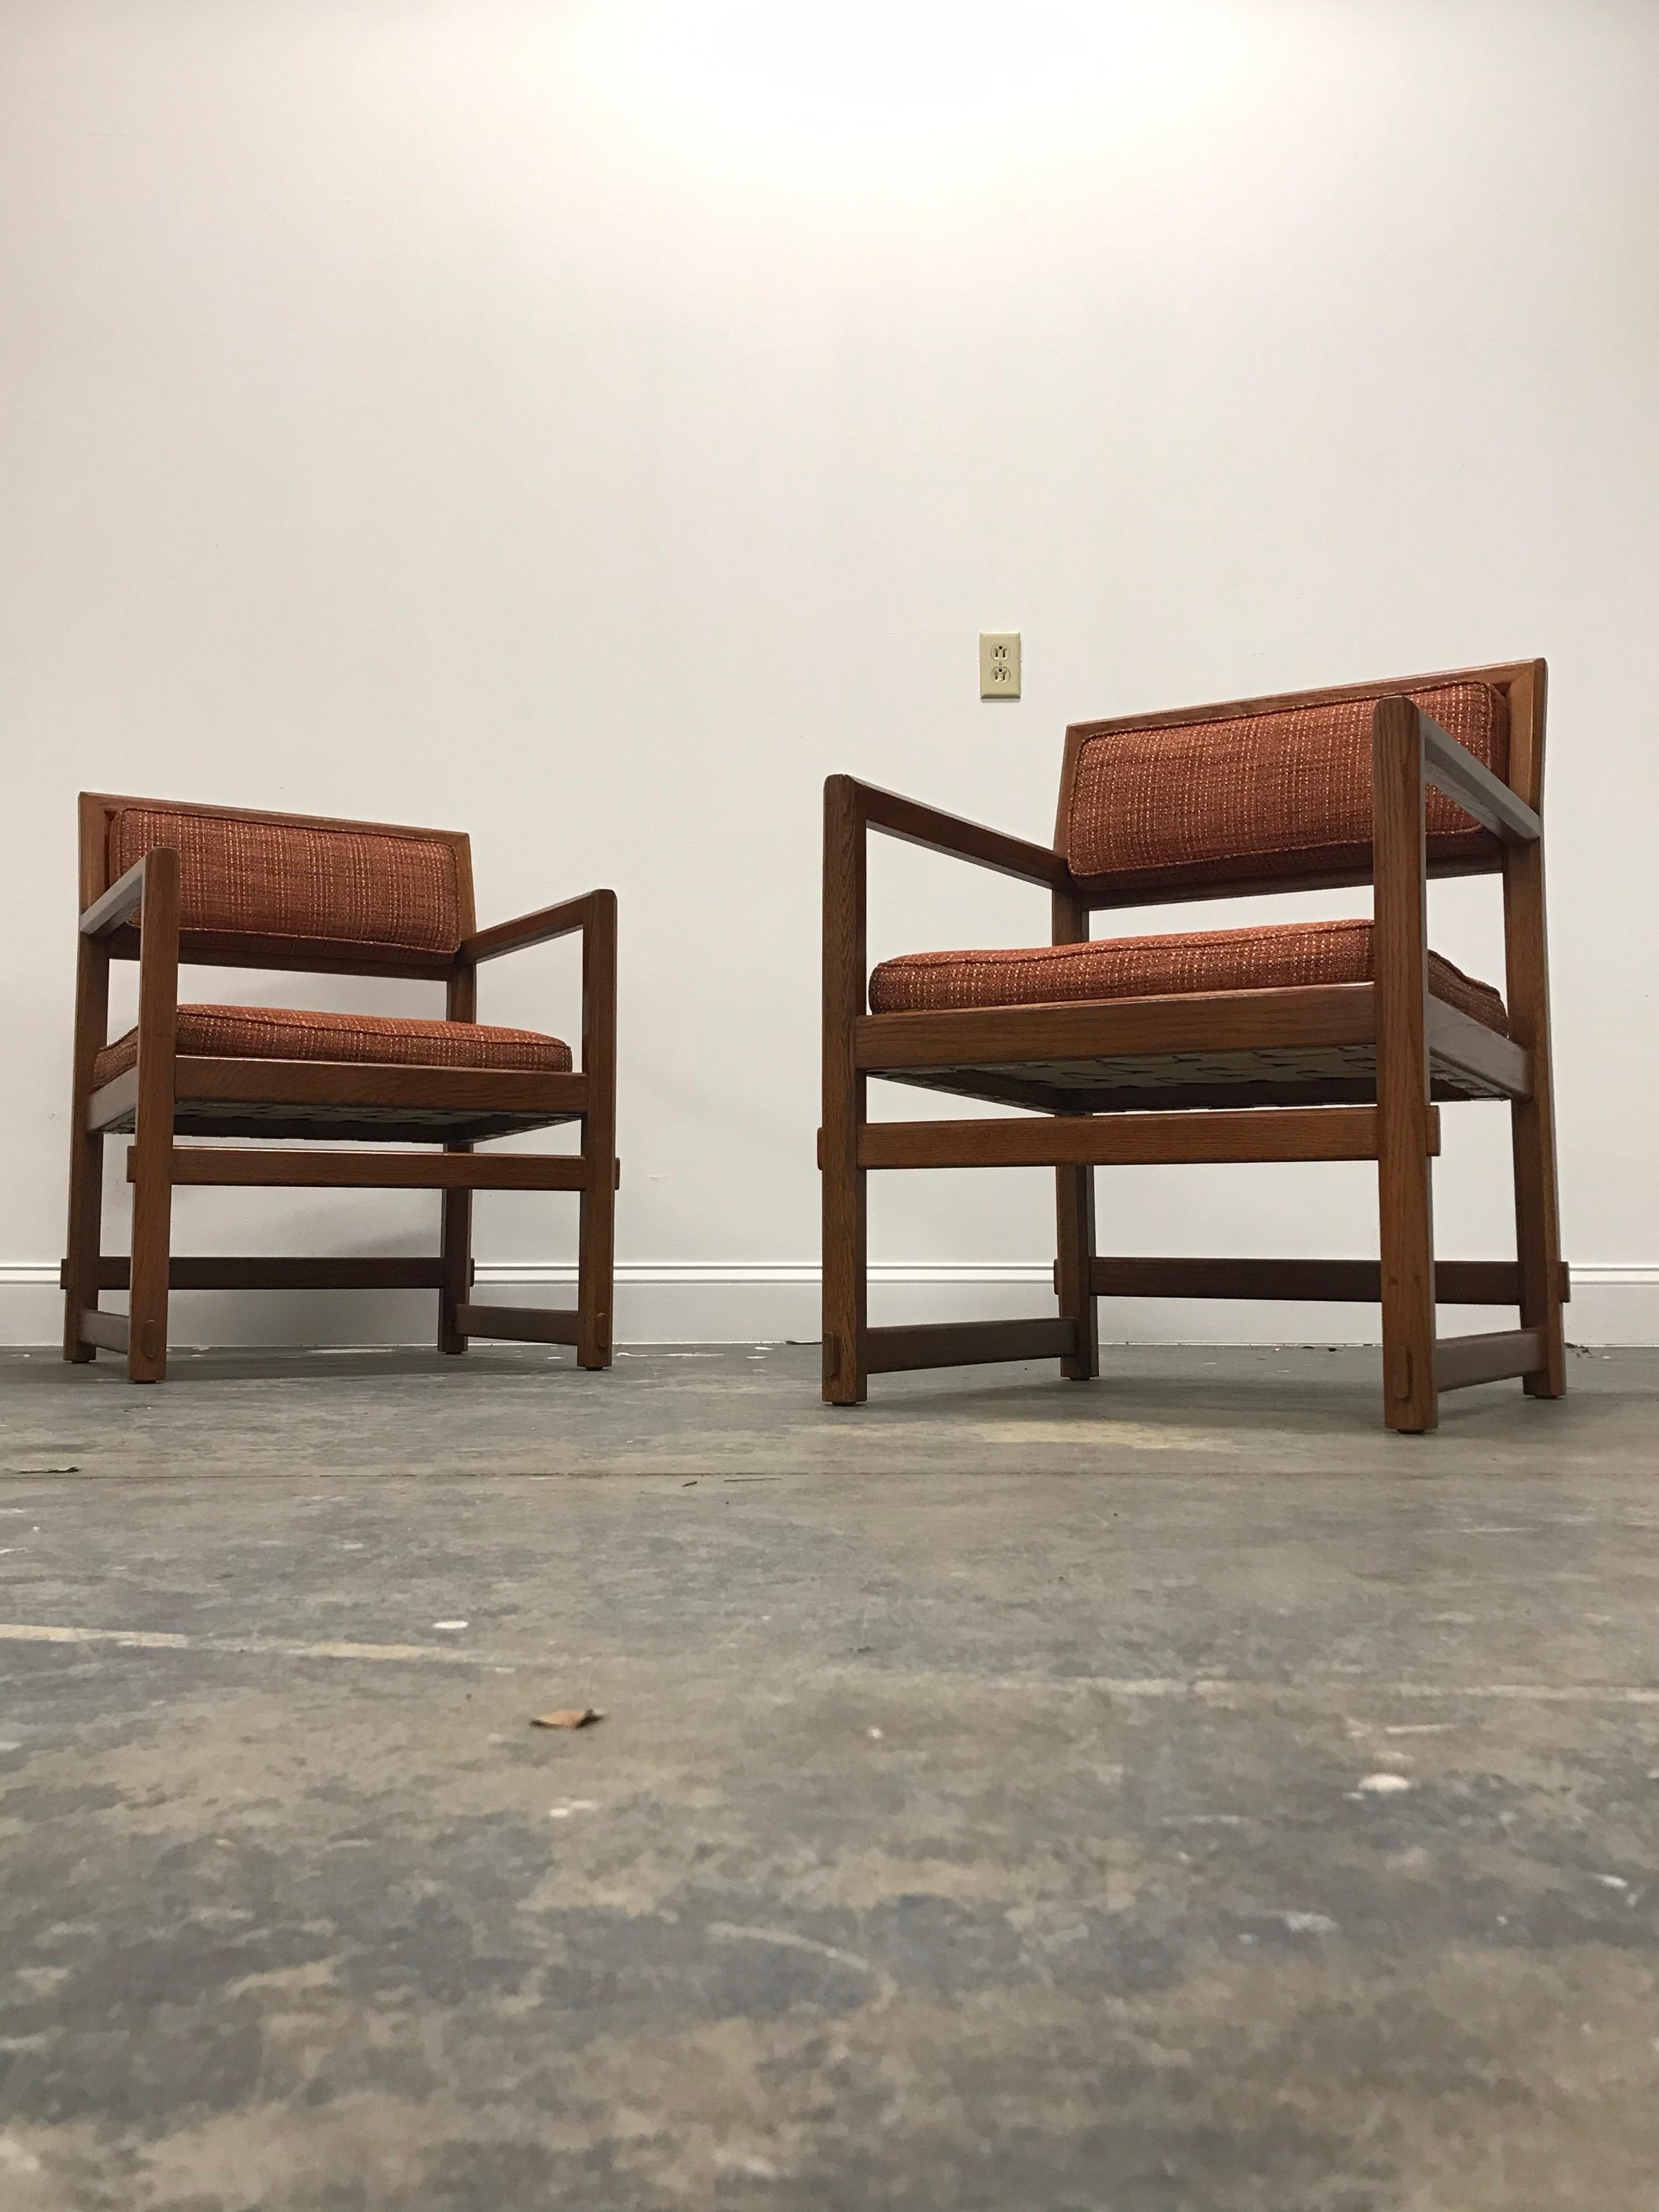 Stunning pair of oak framed chairs by Edward Wormley for Dunbar, referred to as “Edward’s Chair”. New fabric and great original finish. Chairs are quite substantial in size, please see dimensions;

Measures: 24